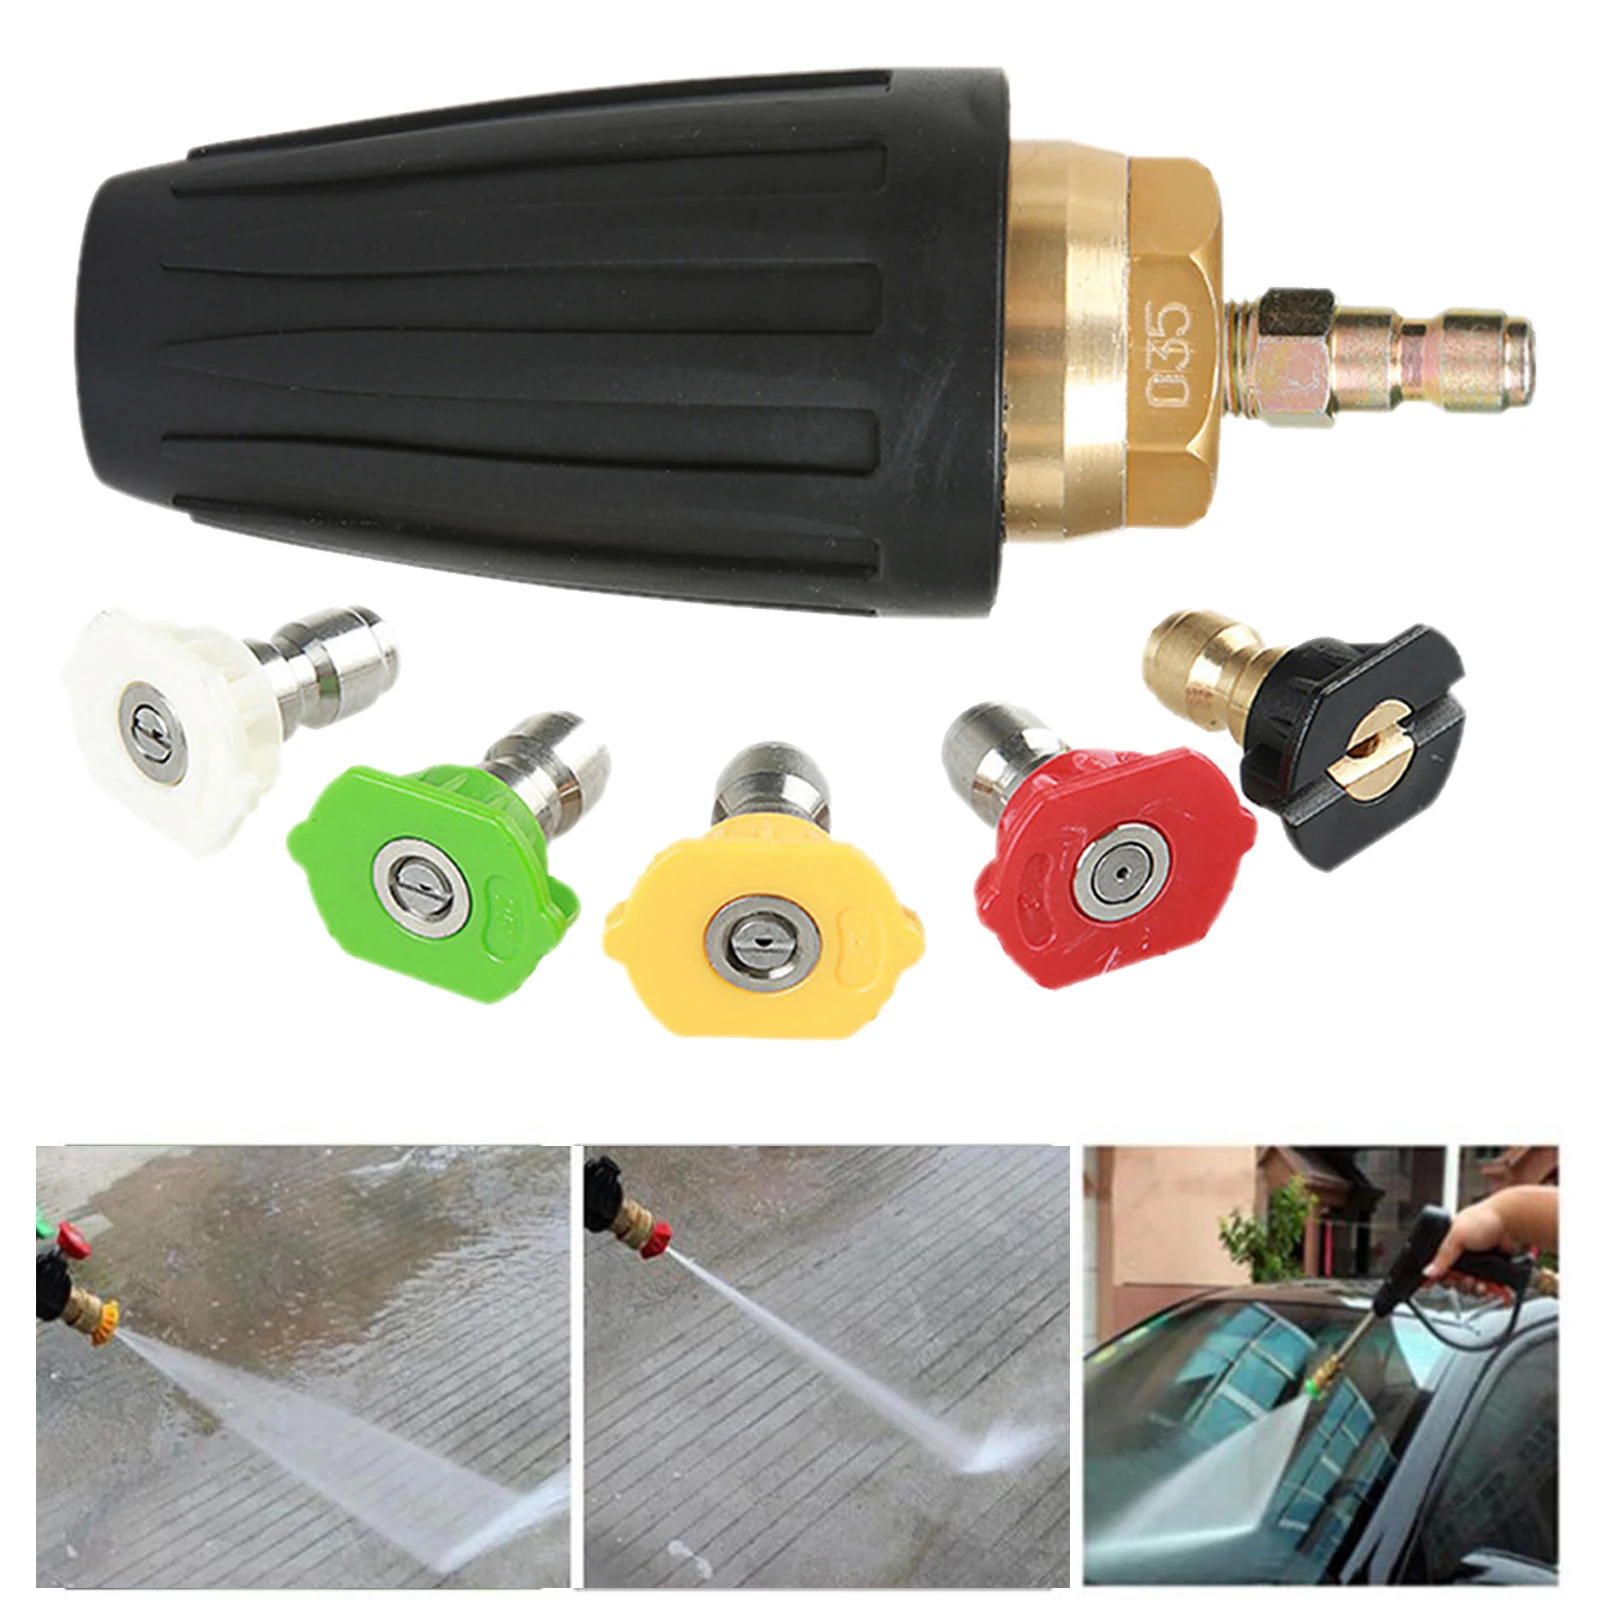 Power High Pressure Washer Wand Extension Set Adapter 3000 PSI Turbo Spray Nozzle and 5 Tips 1/4 inch Quick Connect